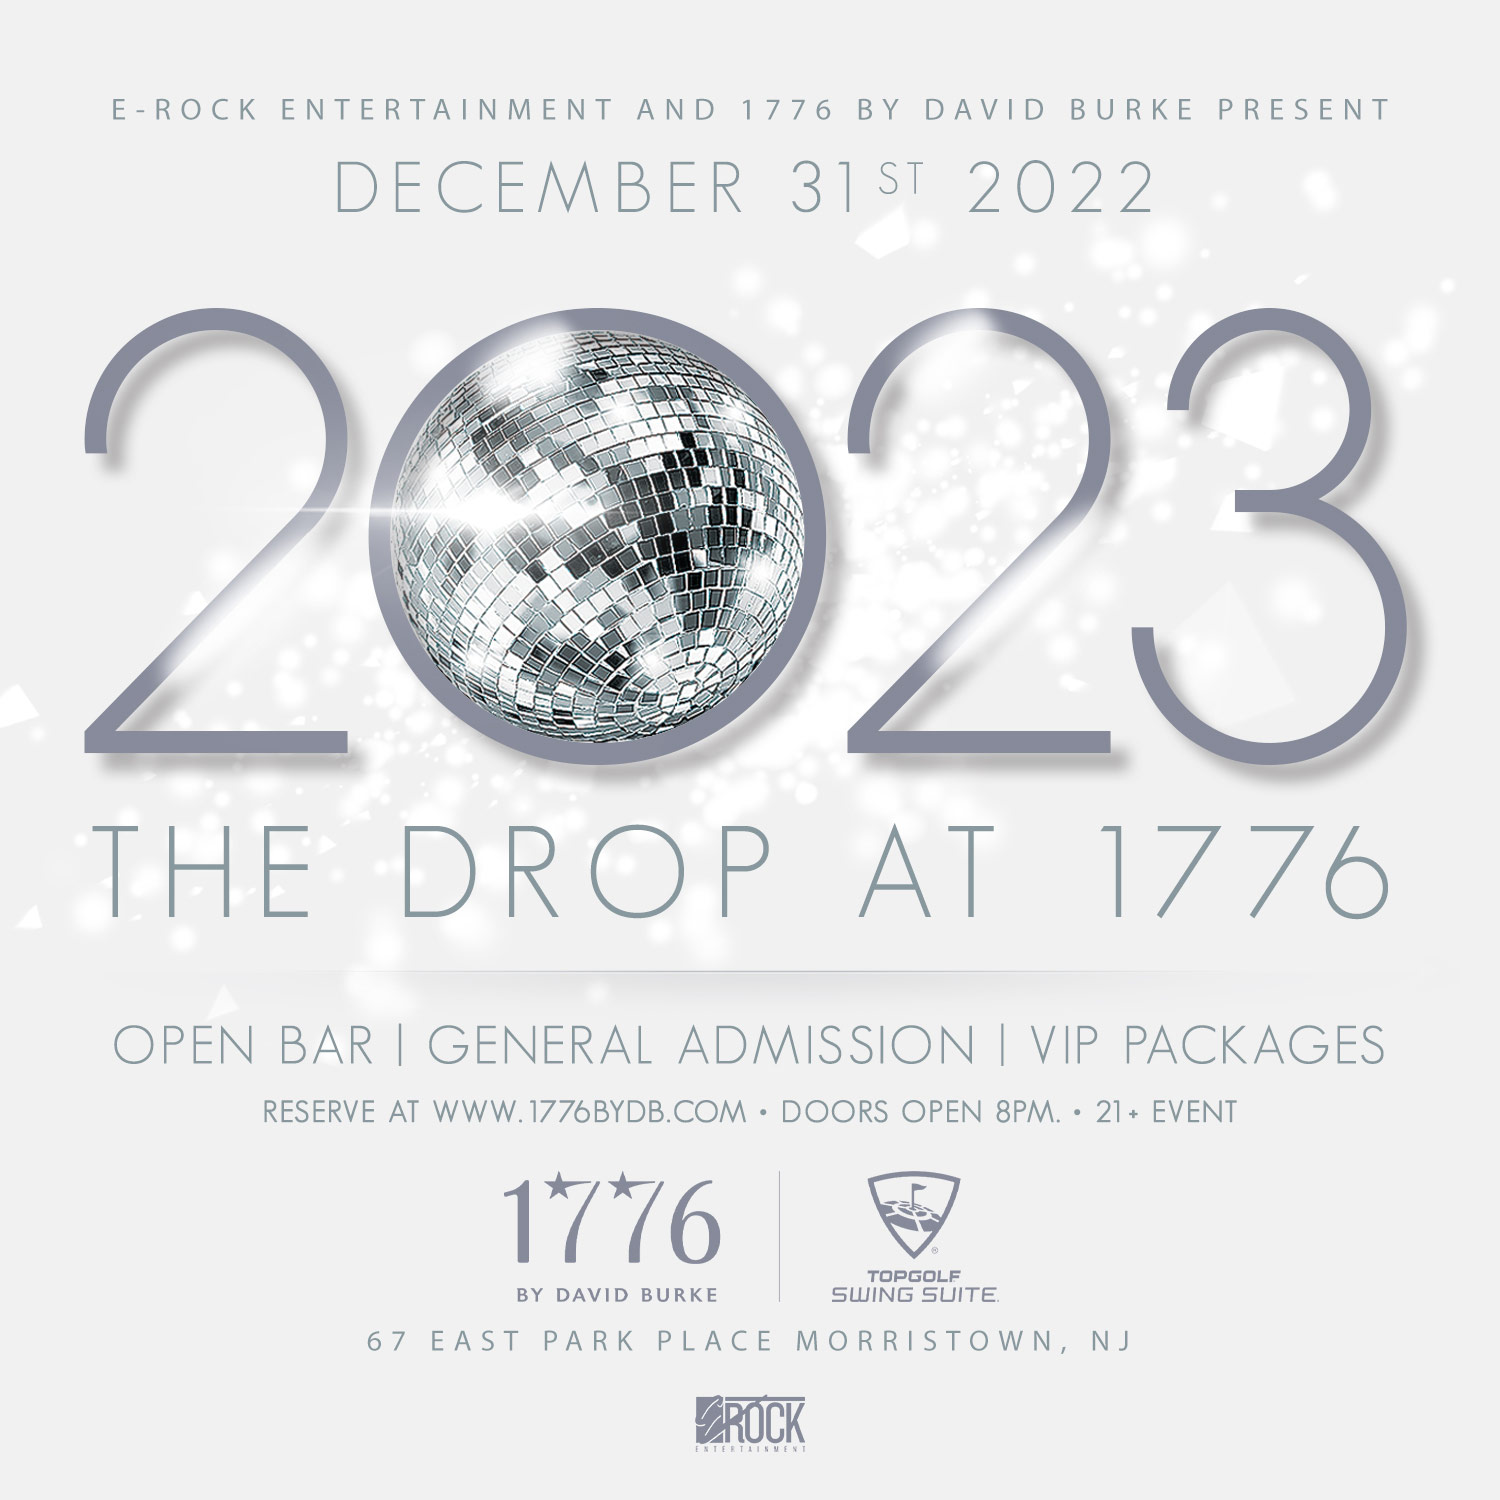 1776 by David Burke New Year's Eve